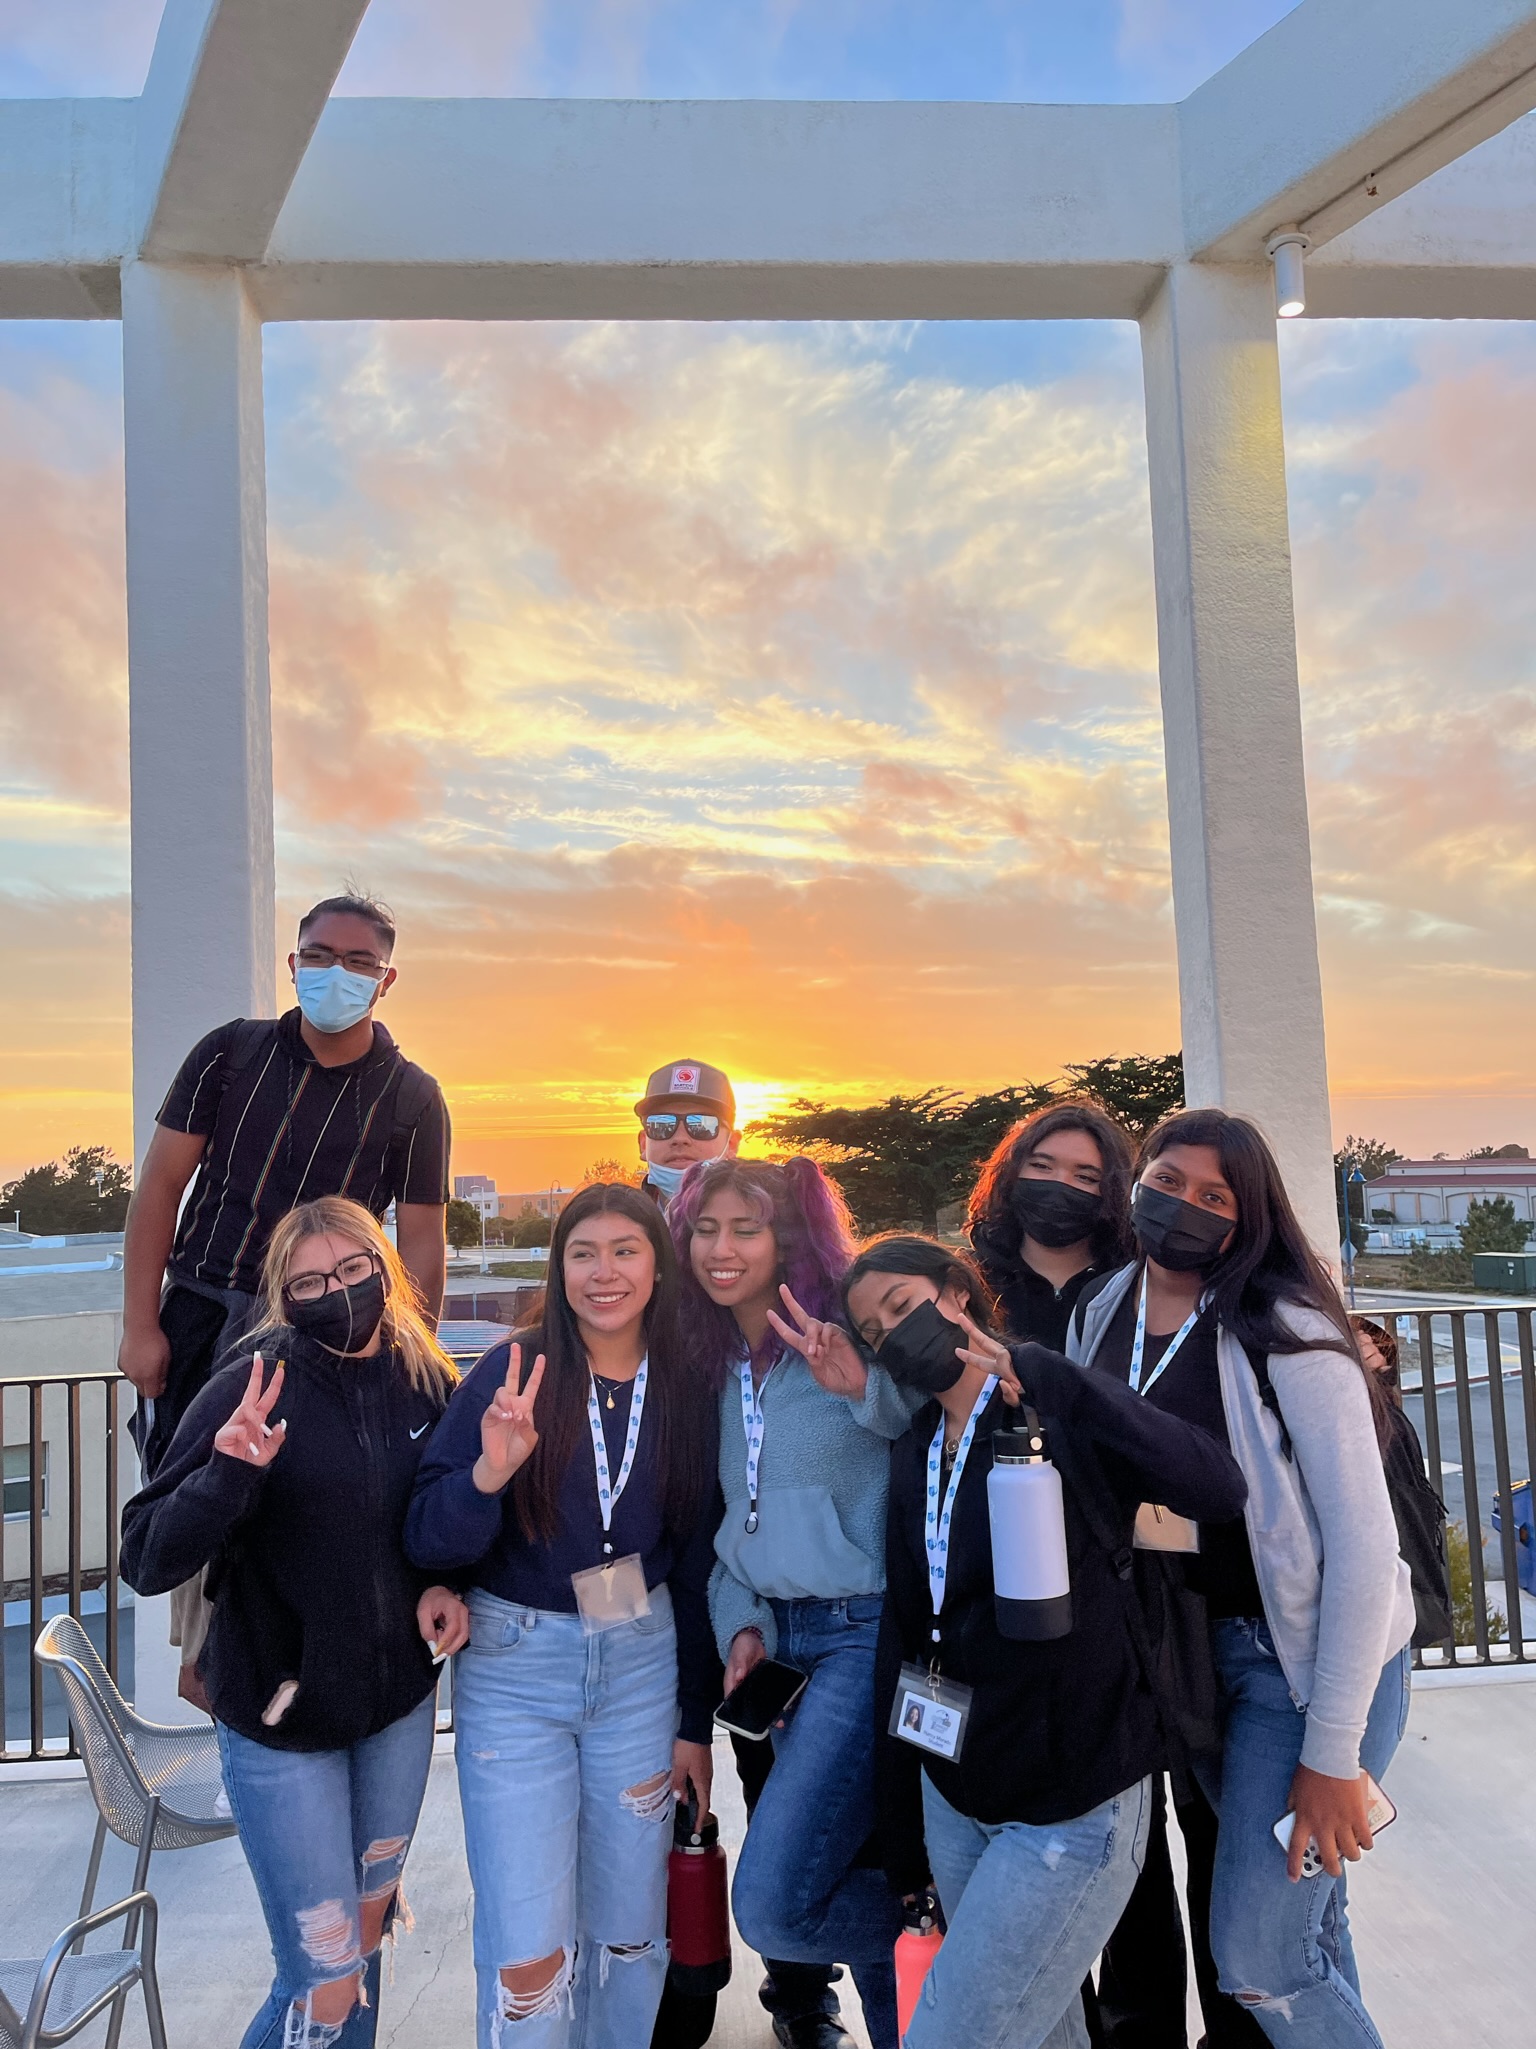 Upward Bound students posing at the Otter Student Union on a beautiful afternoon admiring the sunset.